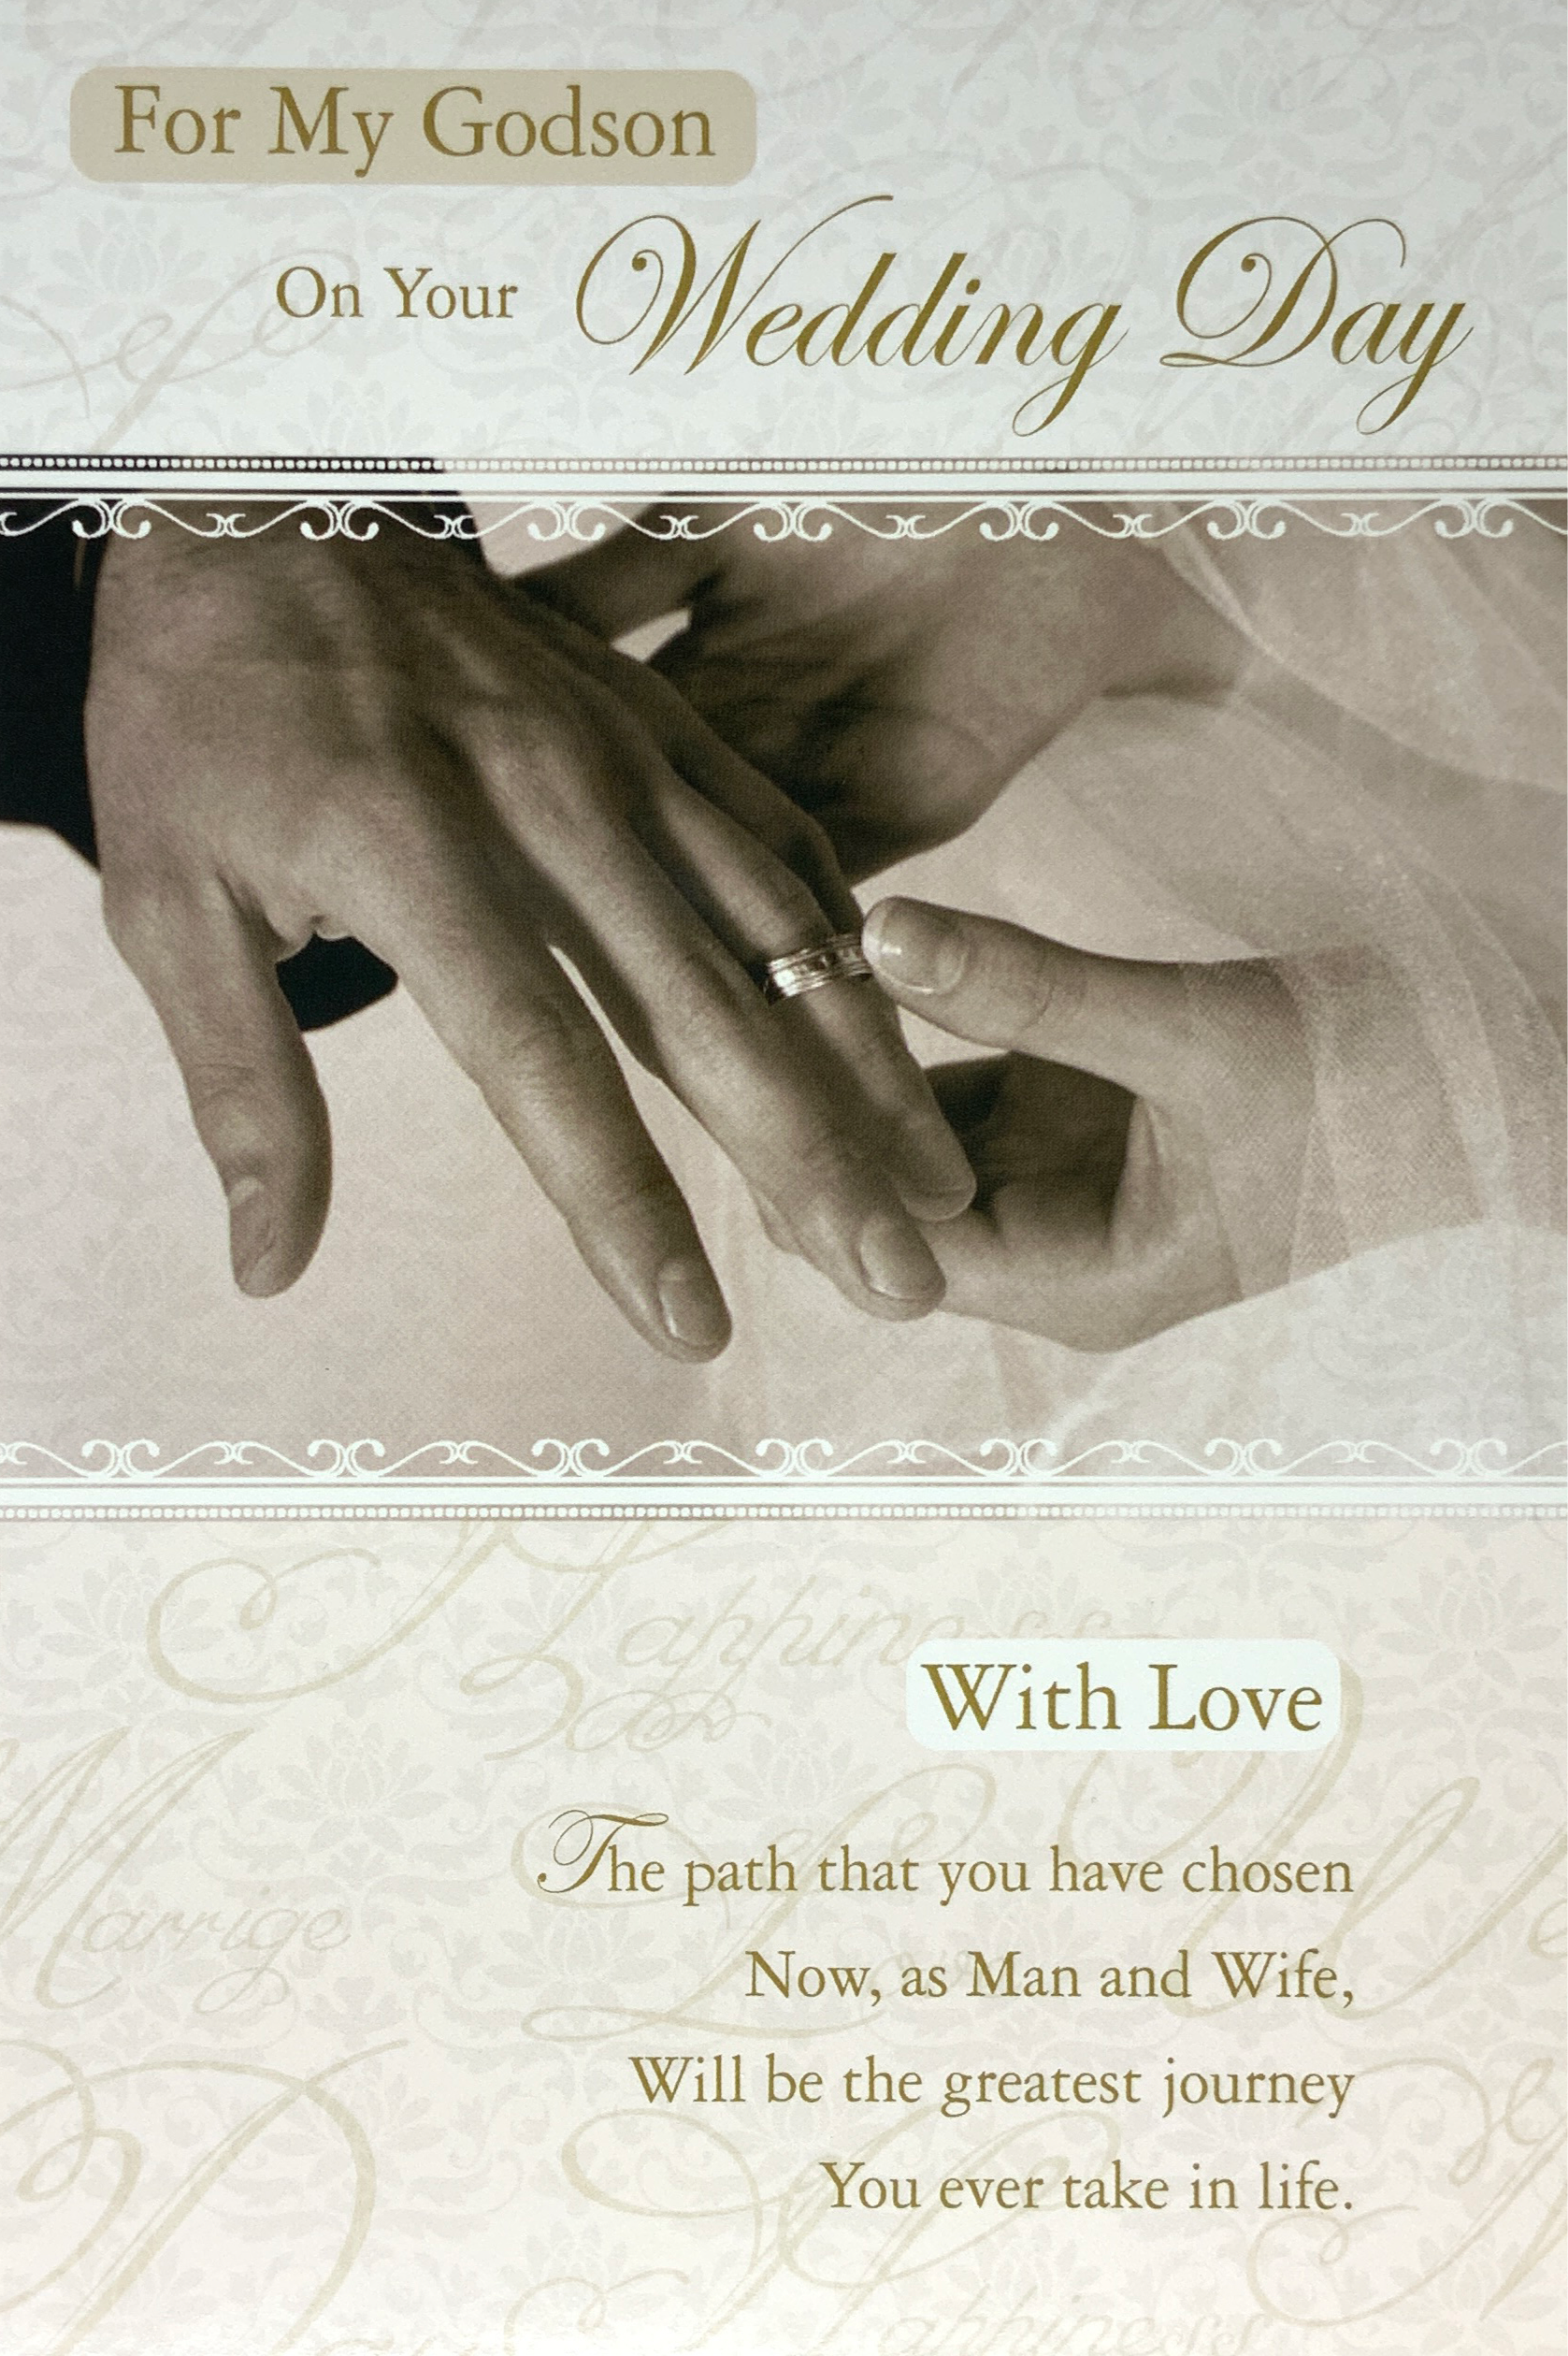 Wedding Card - Godson / Wife's And Husband's Hands & A Wedding Ring